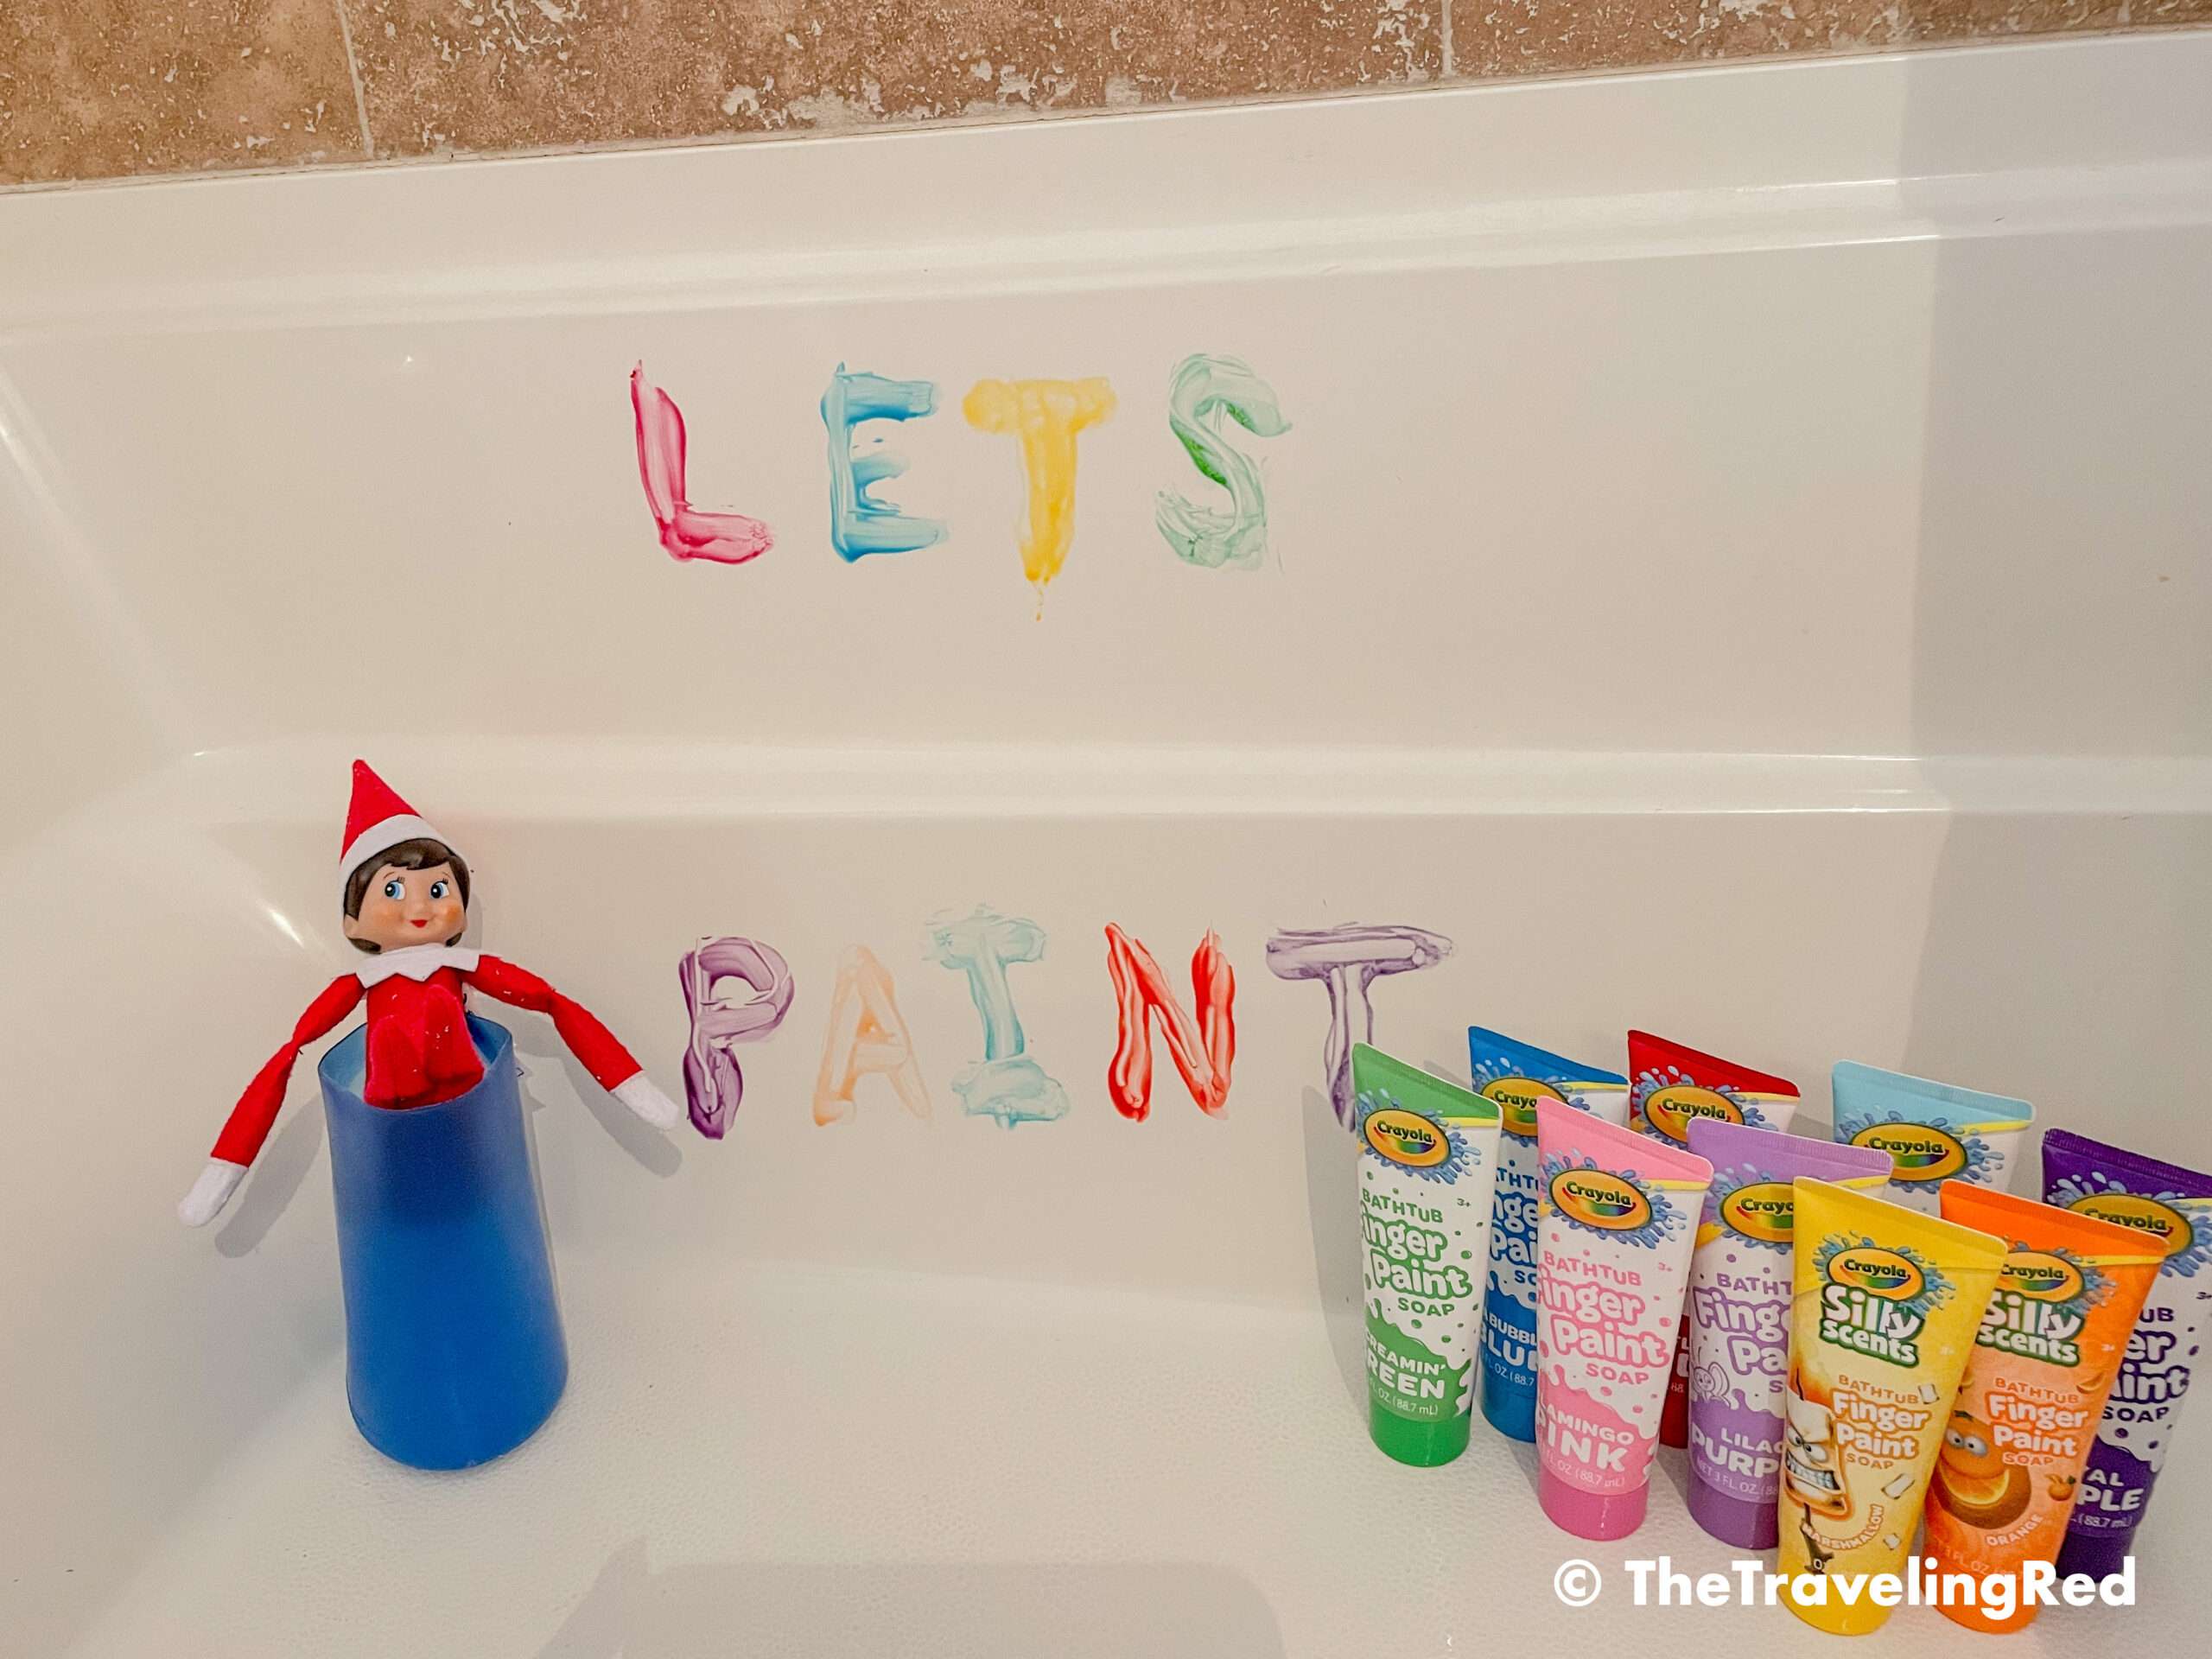 Naughty Elf on the shelf borrowed the bath paints and left a message in the bathtub. Use paints for a fun message. Fun and easy elf on the shelf ideas for a naughty elf that are quick and easy using things you have at home.